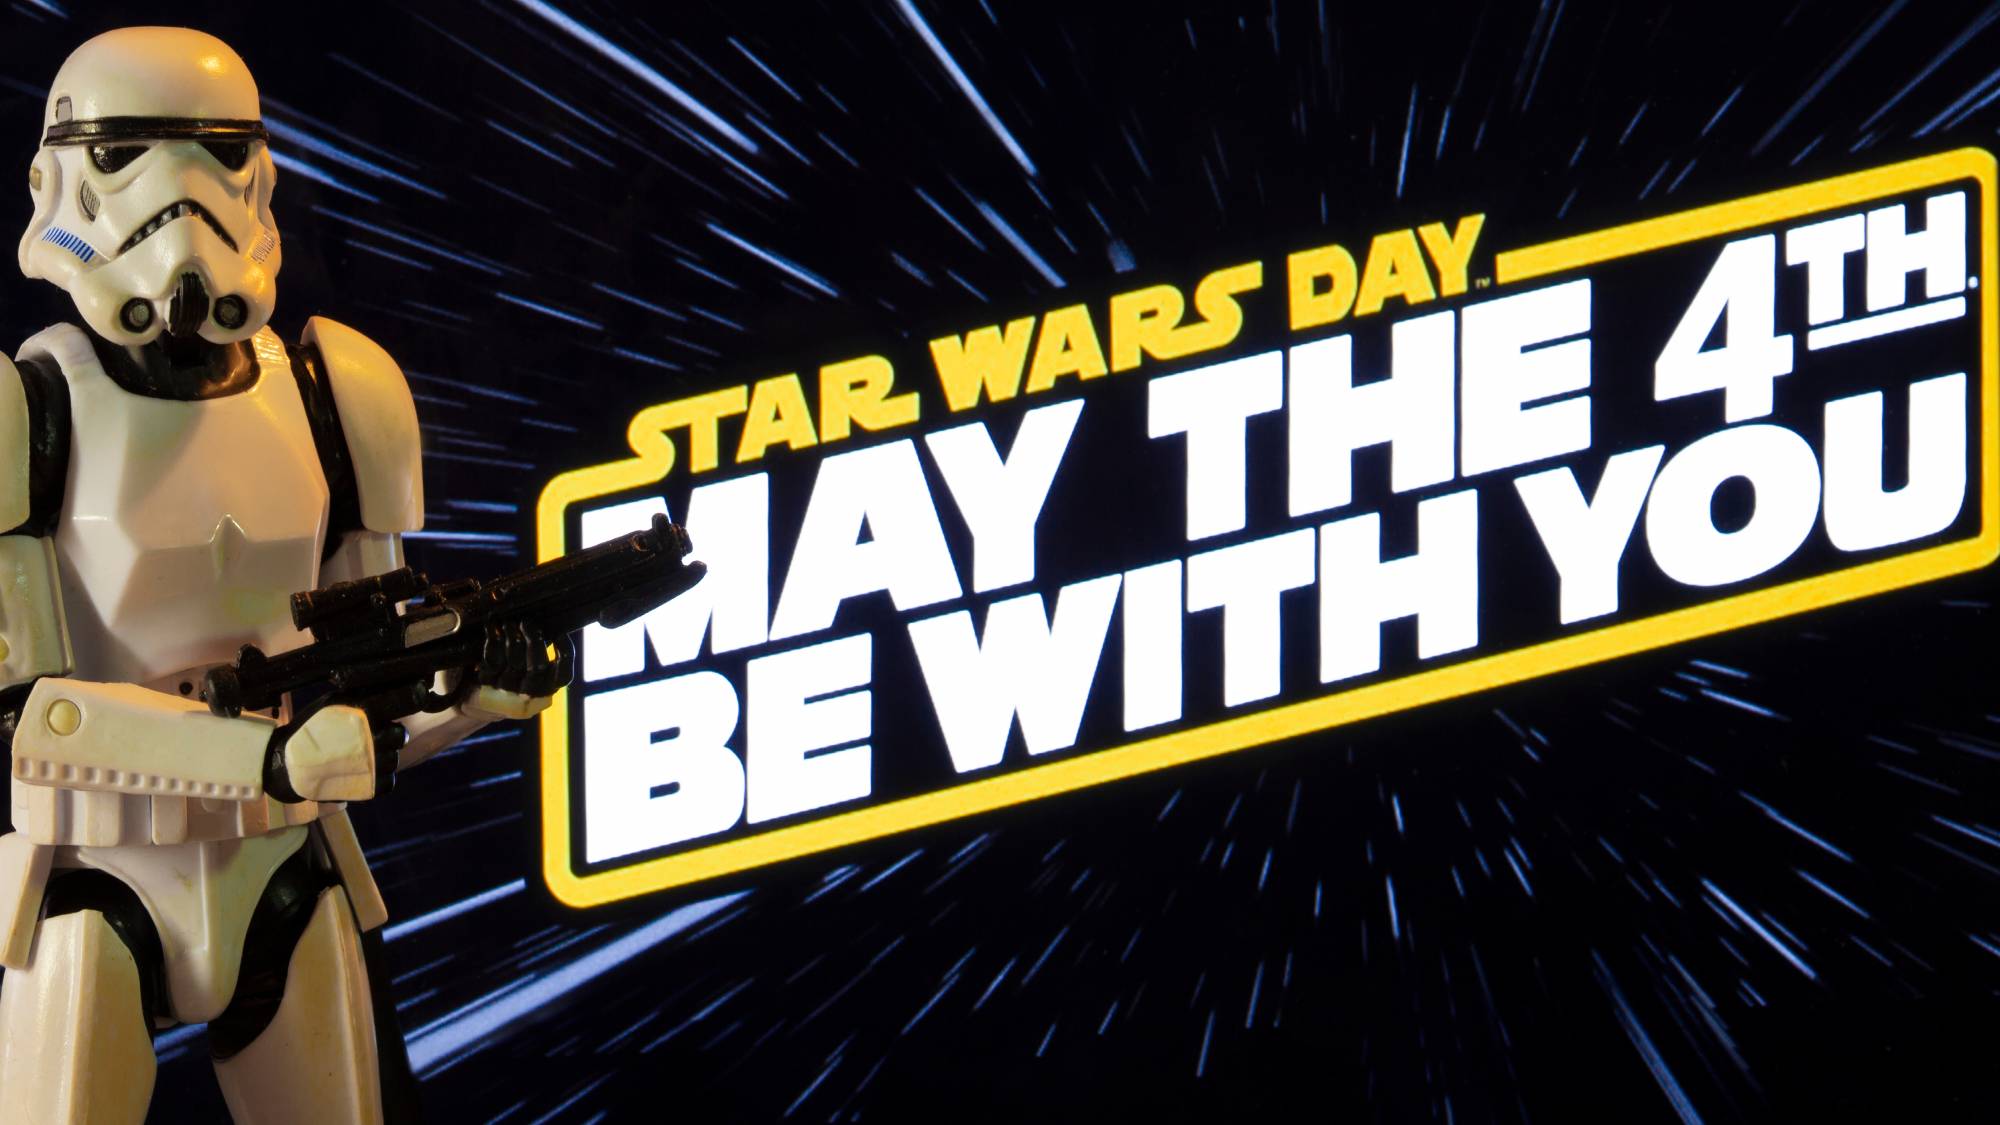 Star Wars Day Sales for 2023 Are Live! Here's What to Expect